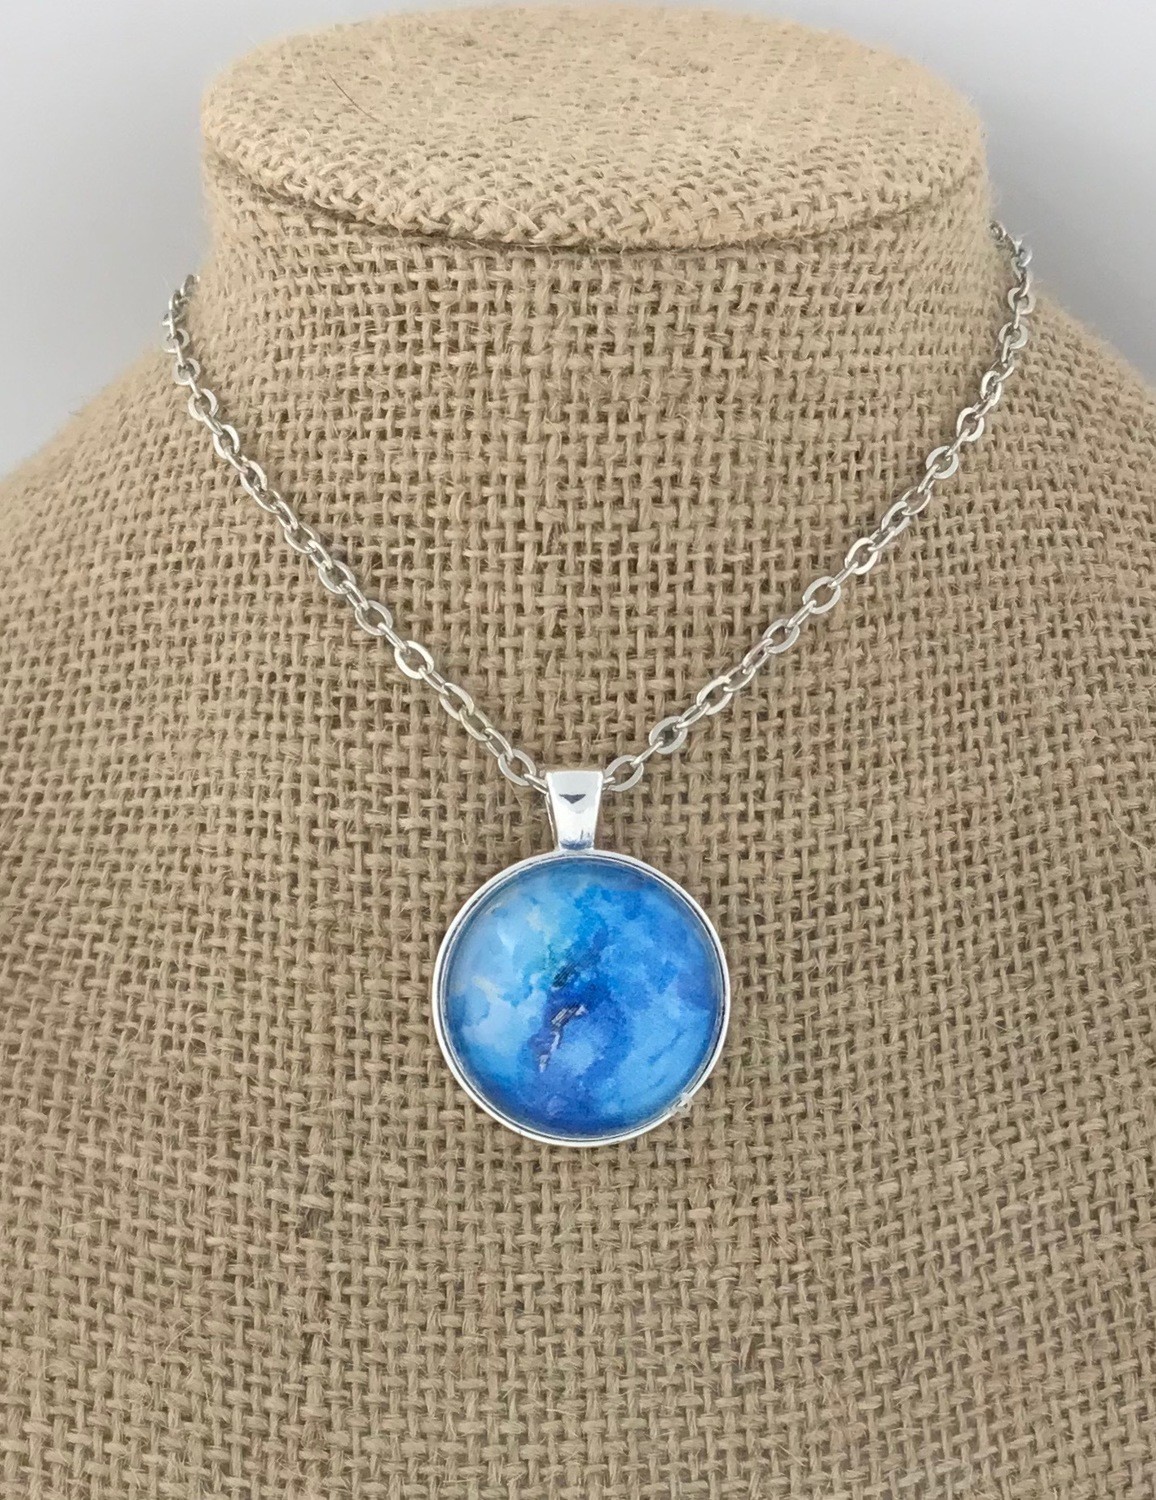 BLUE MOON Ink Painting Pendant Necklace